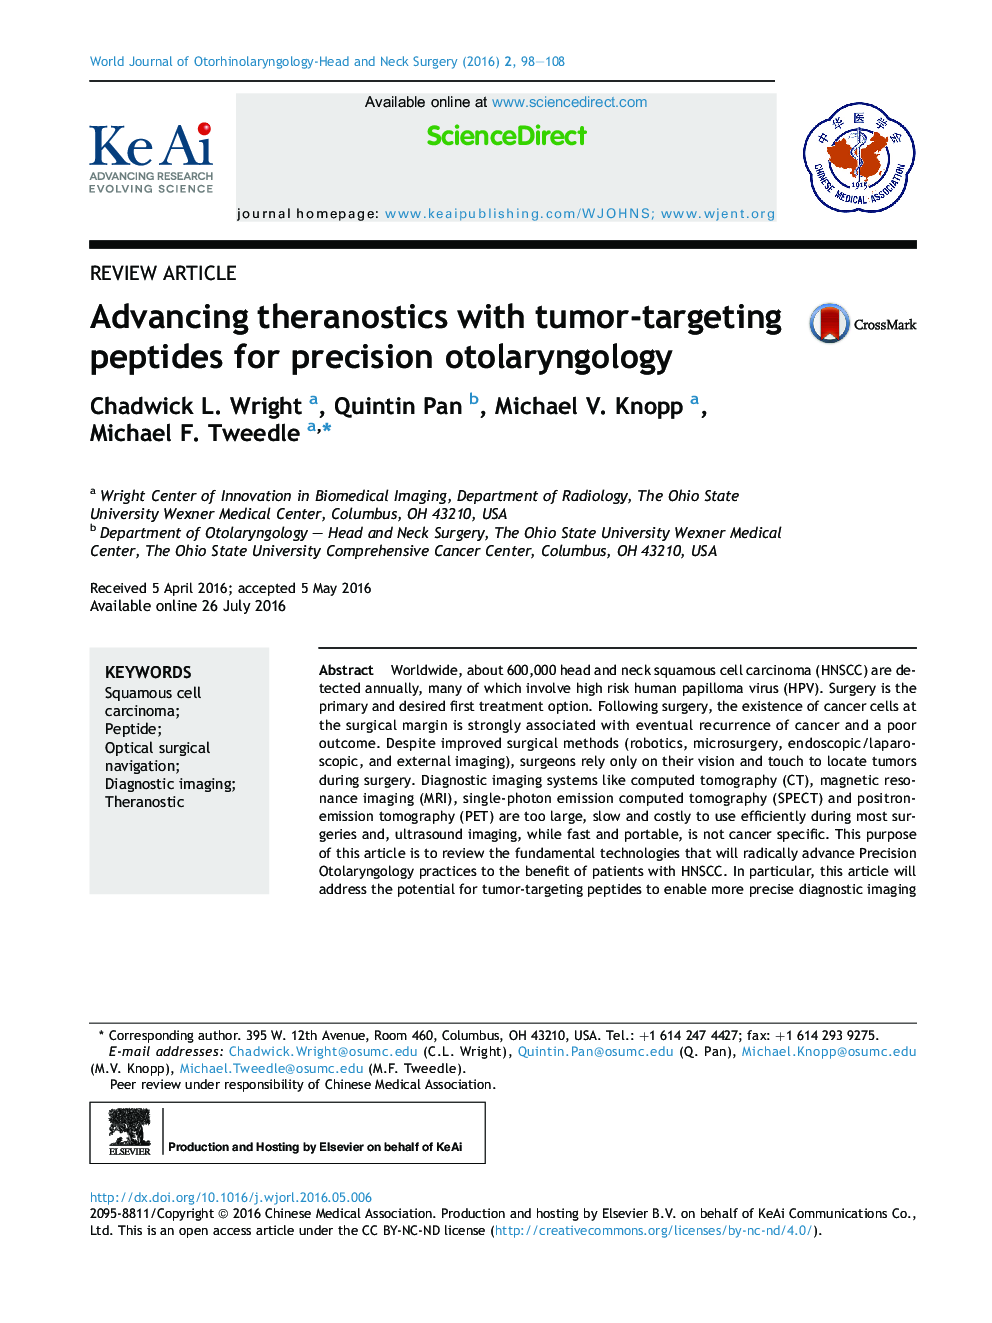 Advancing theranostics with tumor-targeting peptides for precision otolaryngology 